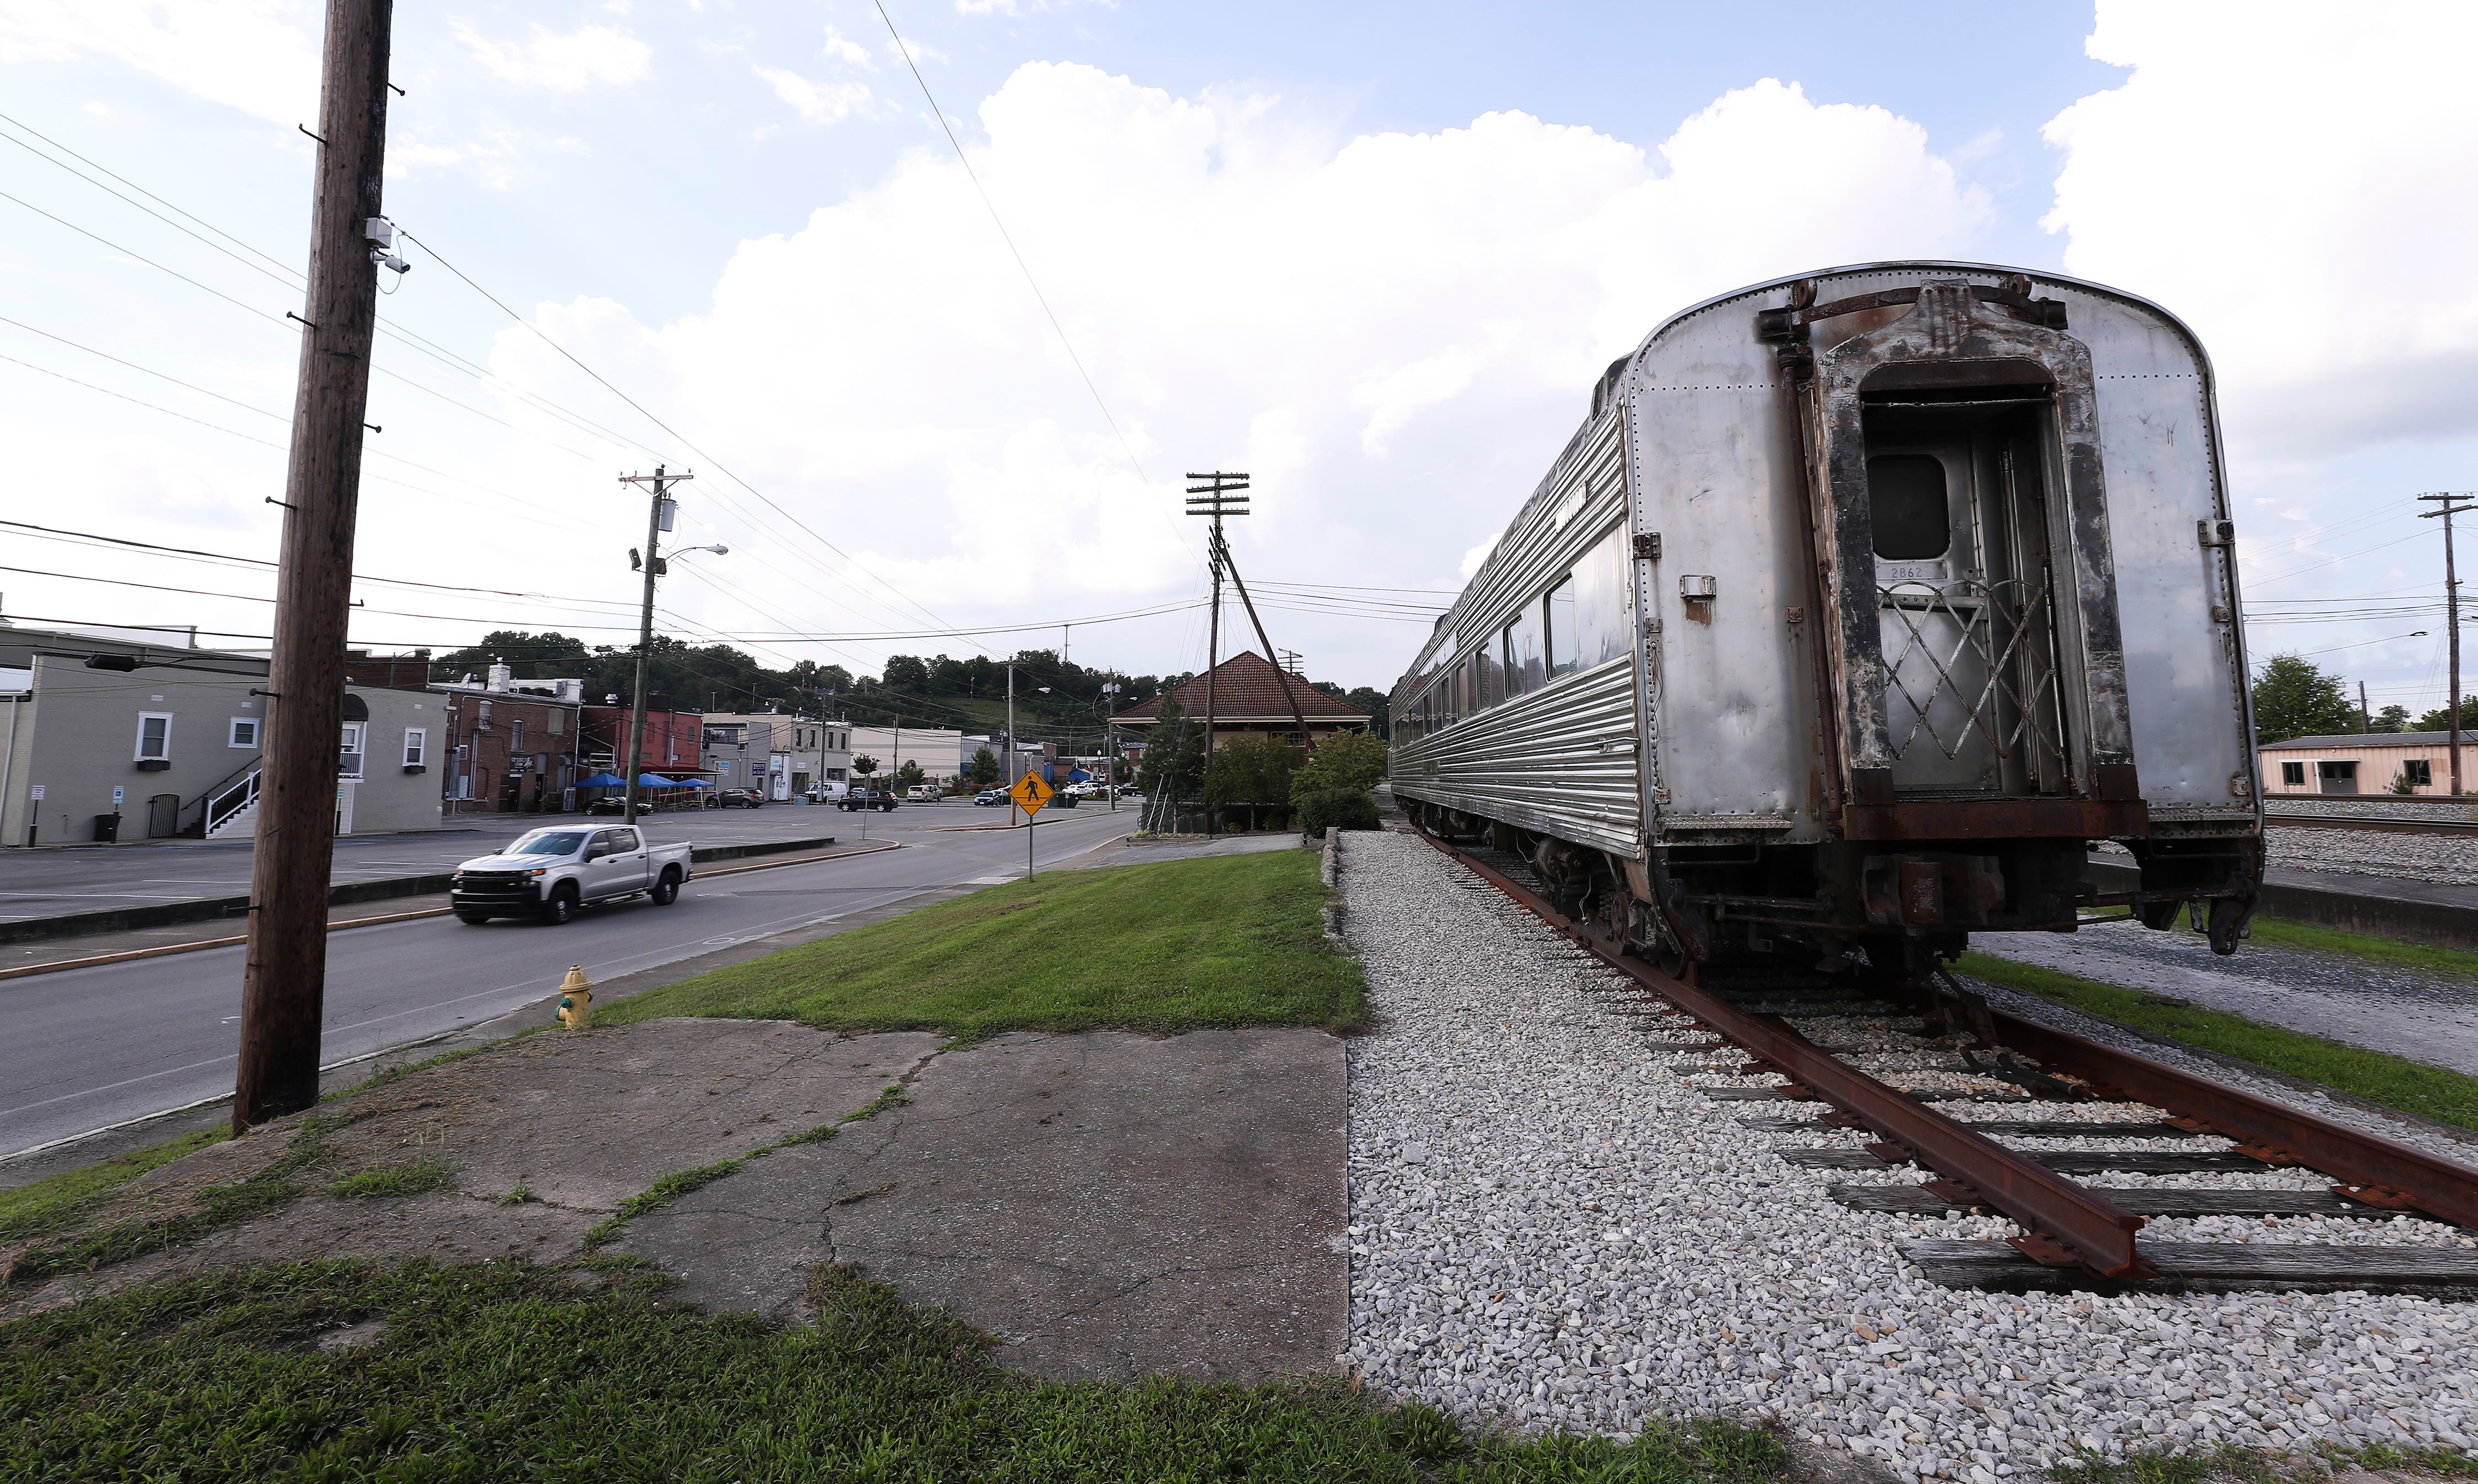 A historical train depot is located in downtown Corbin, Ky. on Aug. 13, 2020.  Corbin is a former “sundown” town where Black residents were forced out at gunpoint a century ago.